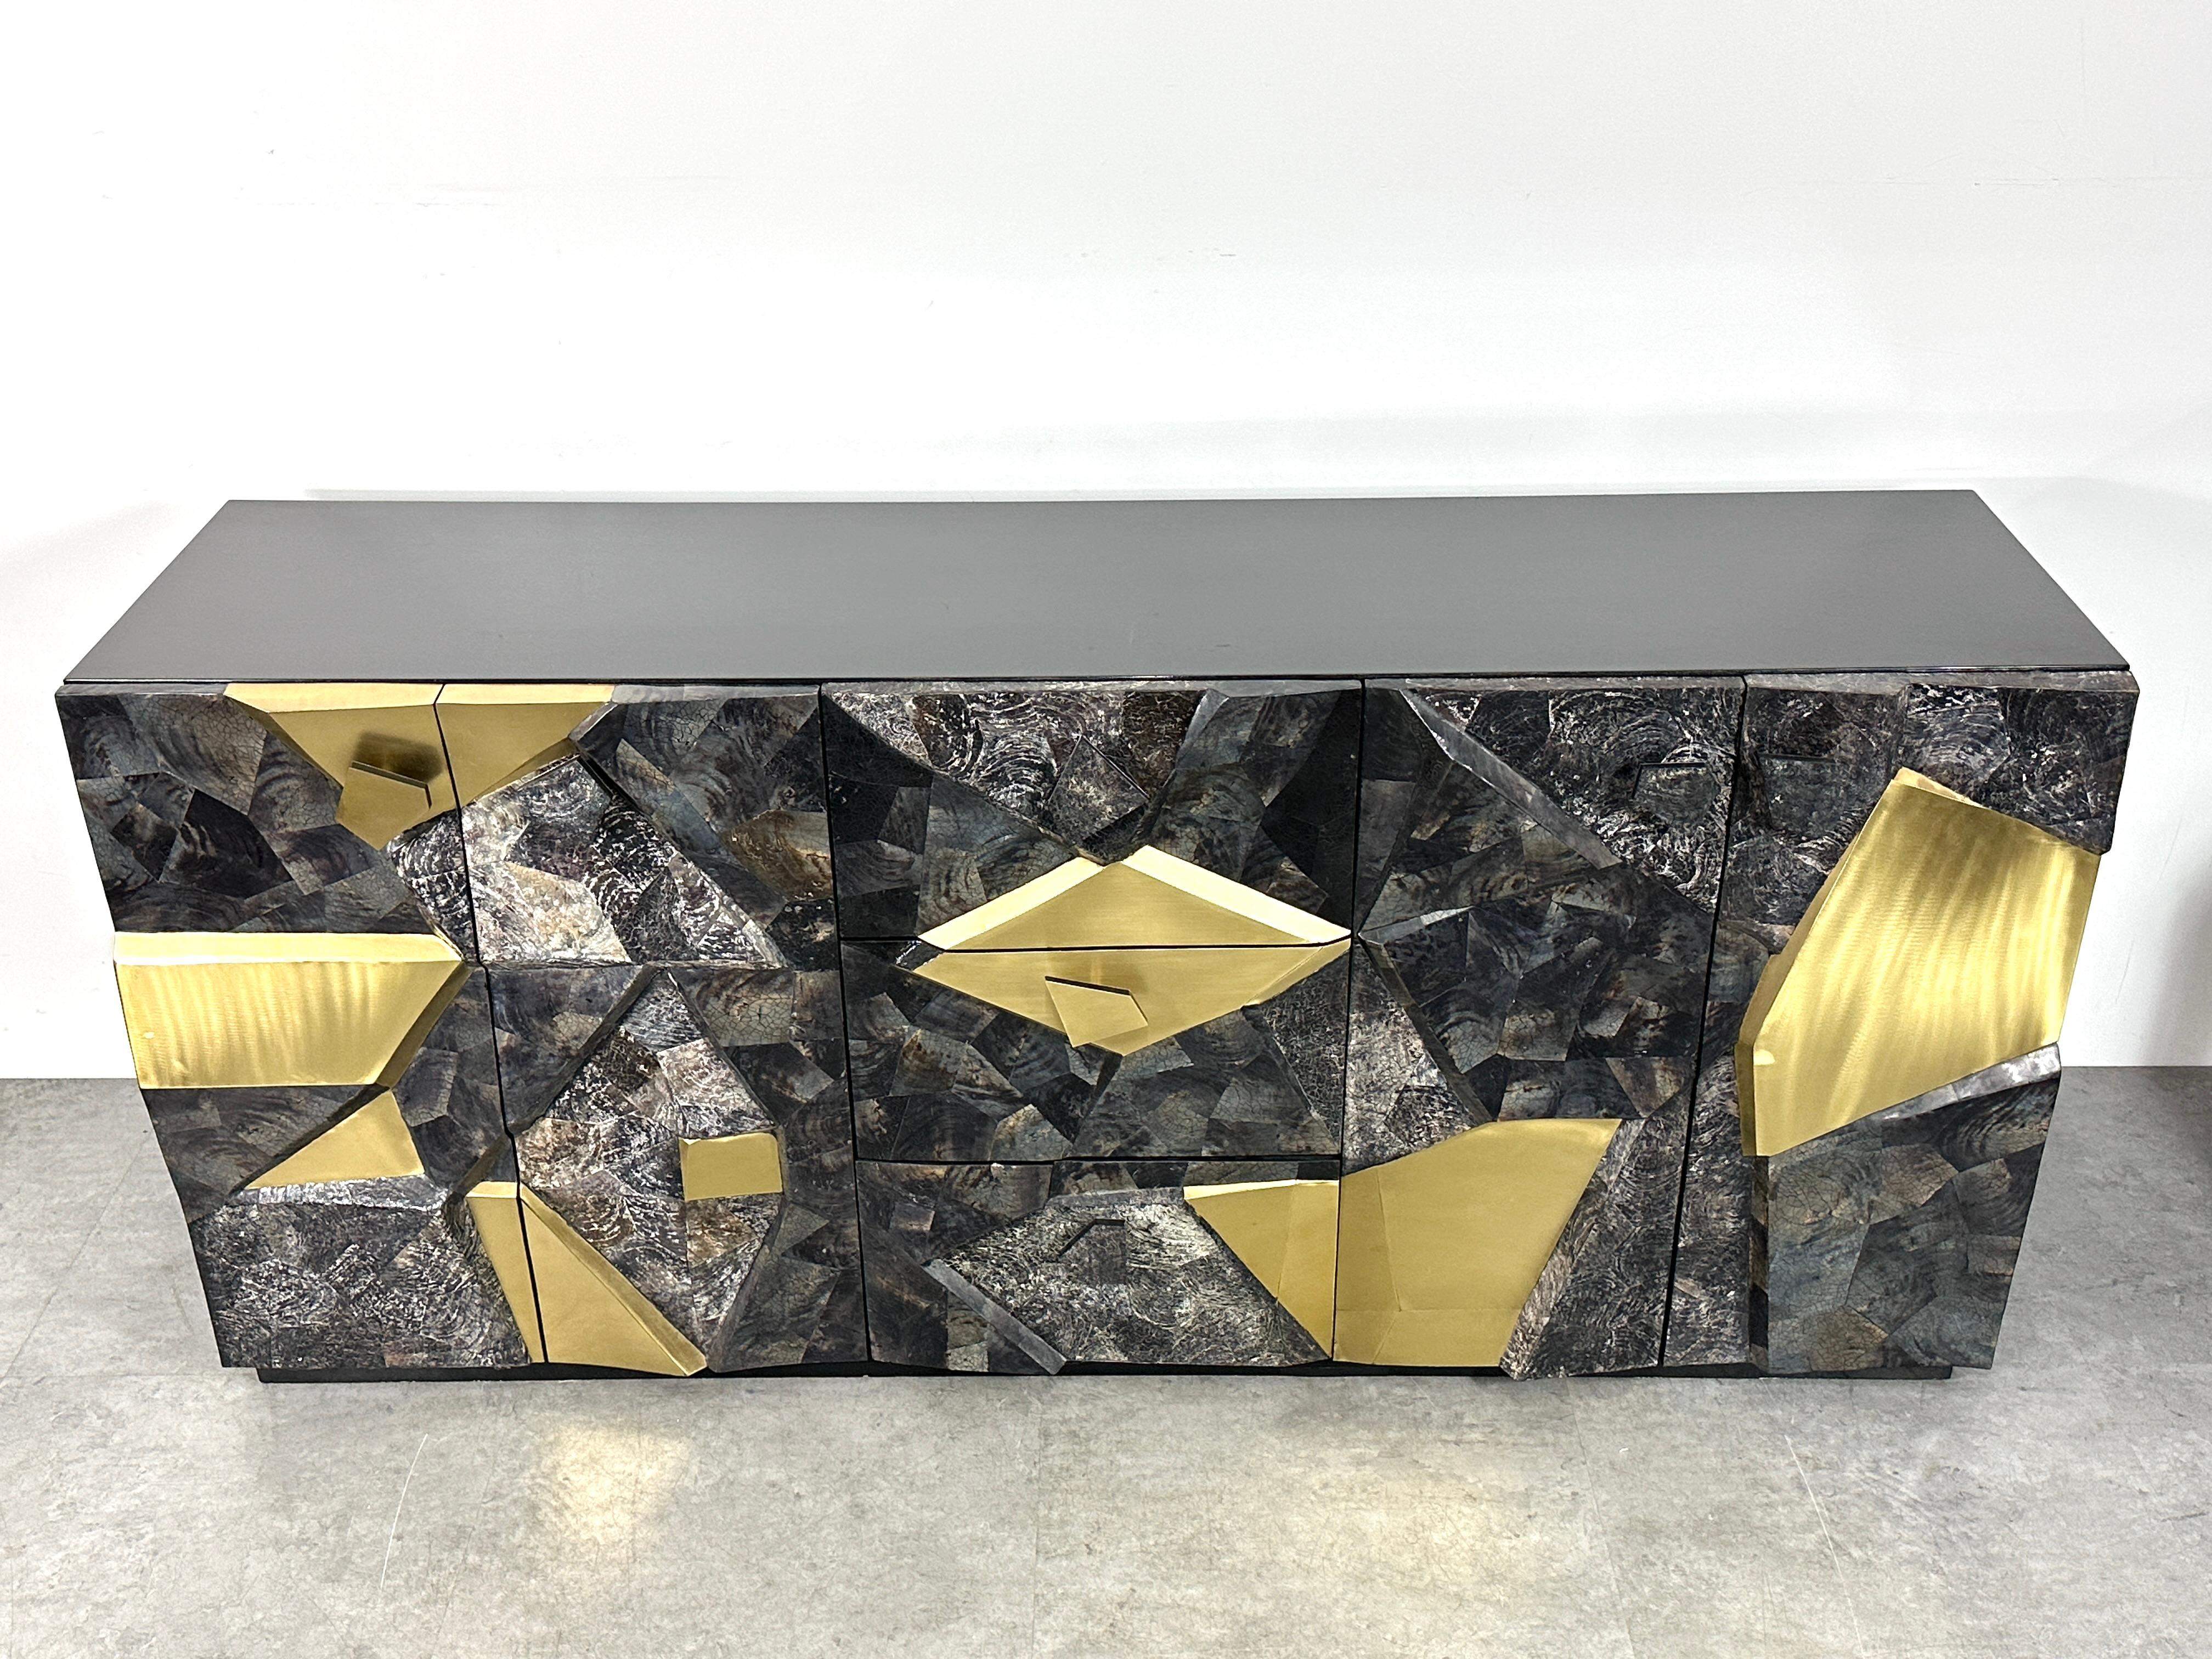 Late 20th Century Brutalist Style Mosaic Stone and Brass Sculpture Front Relief Credenza Cabinet  For Sale